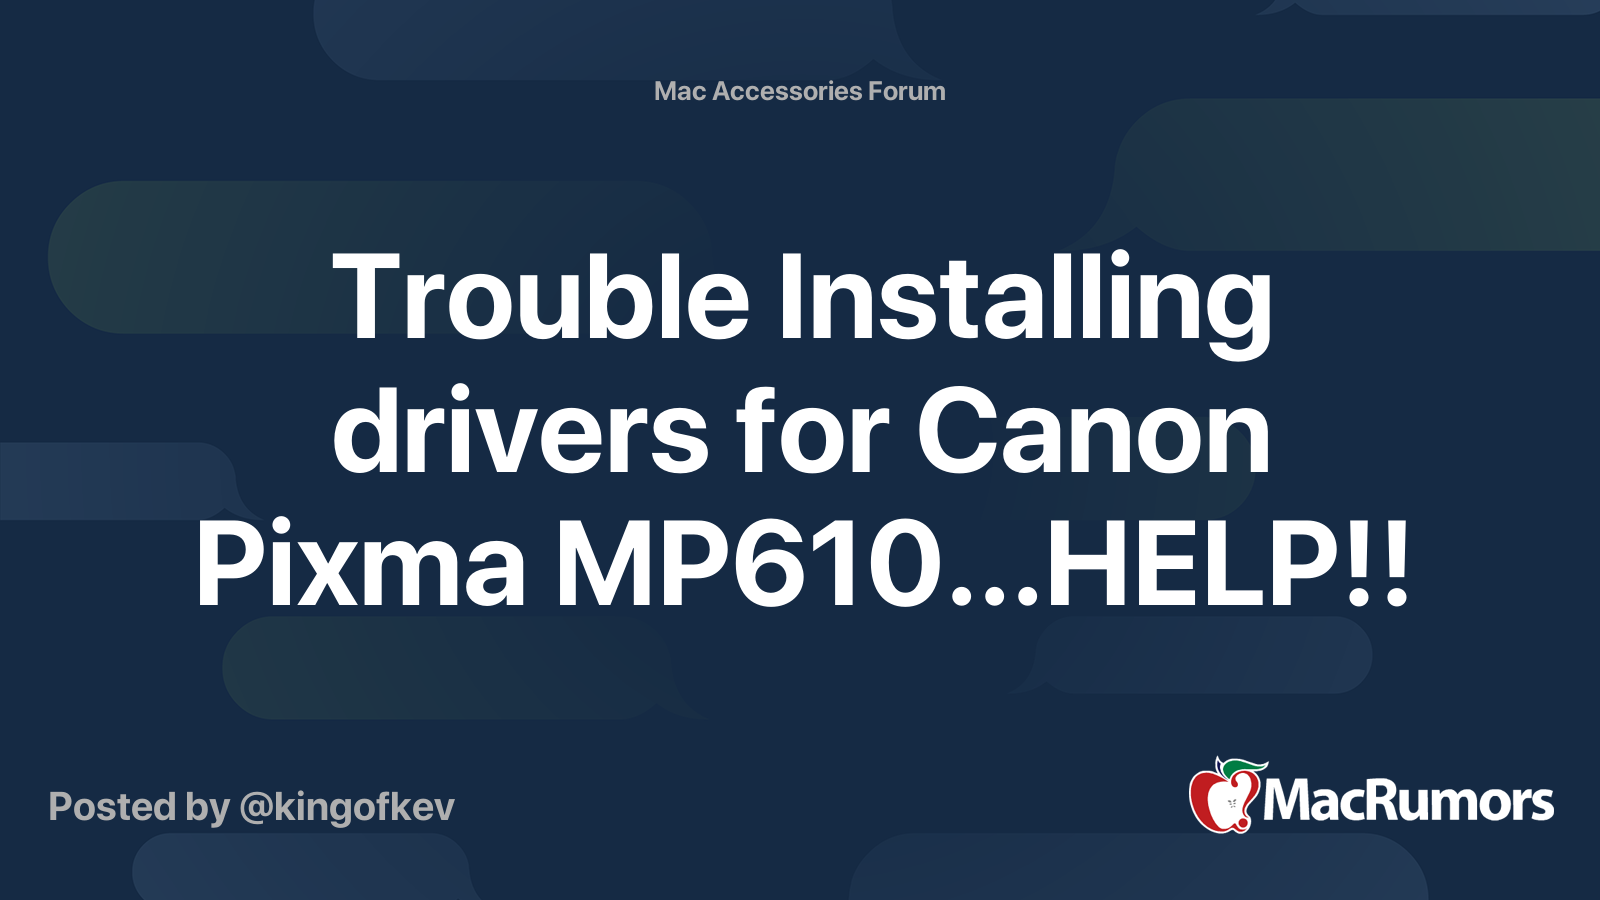 Trouble Installing drivers for Canon Pixma MP610...HELP!!